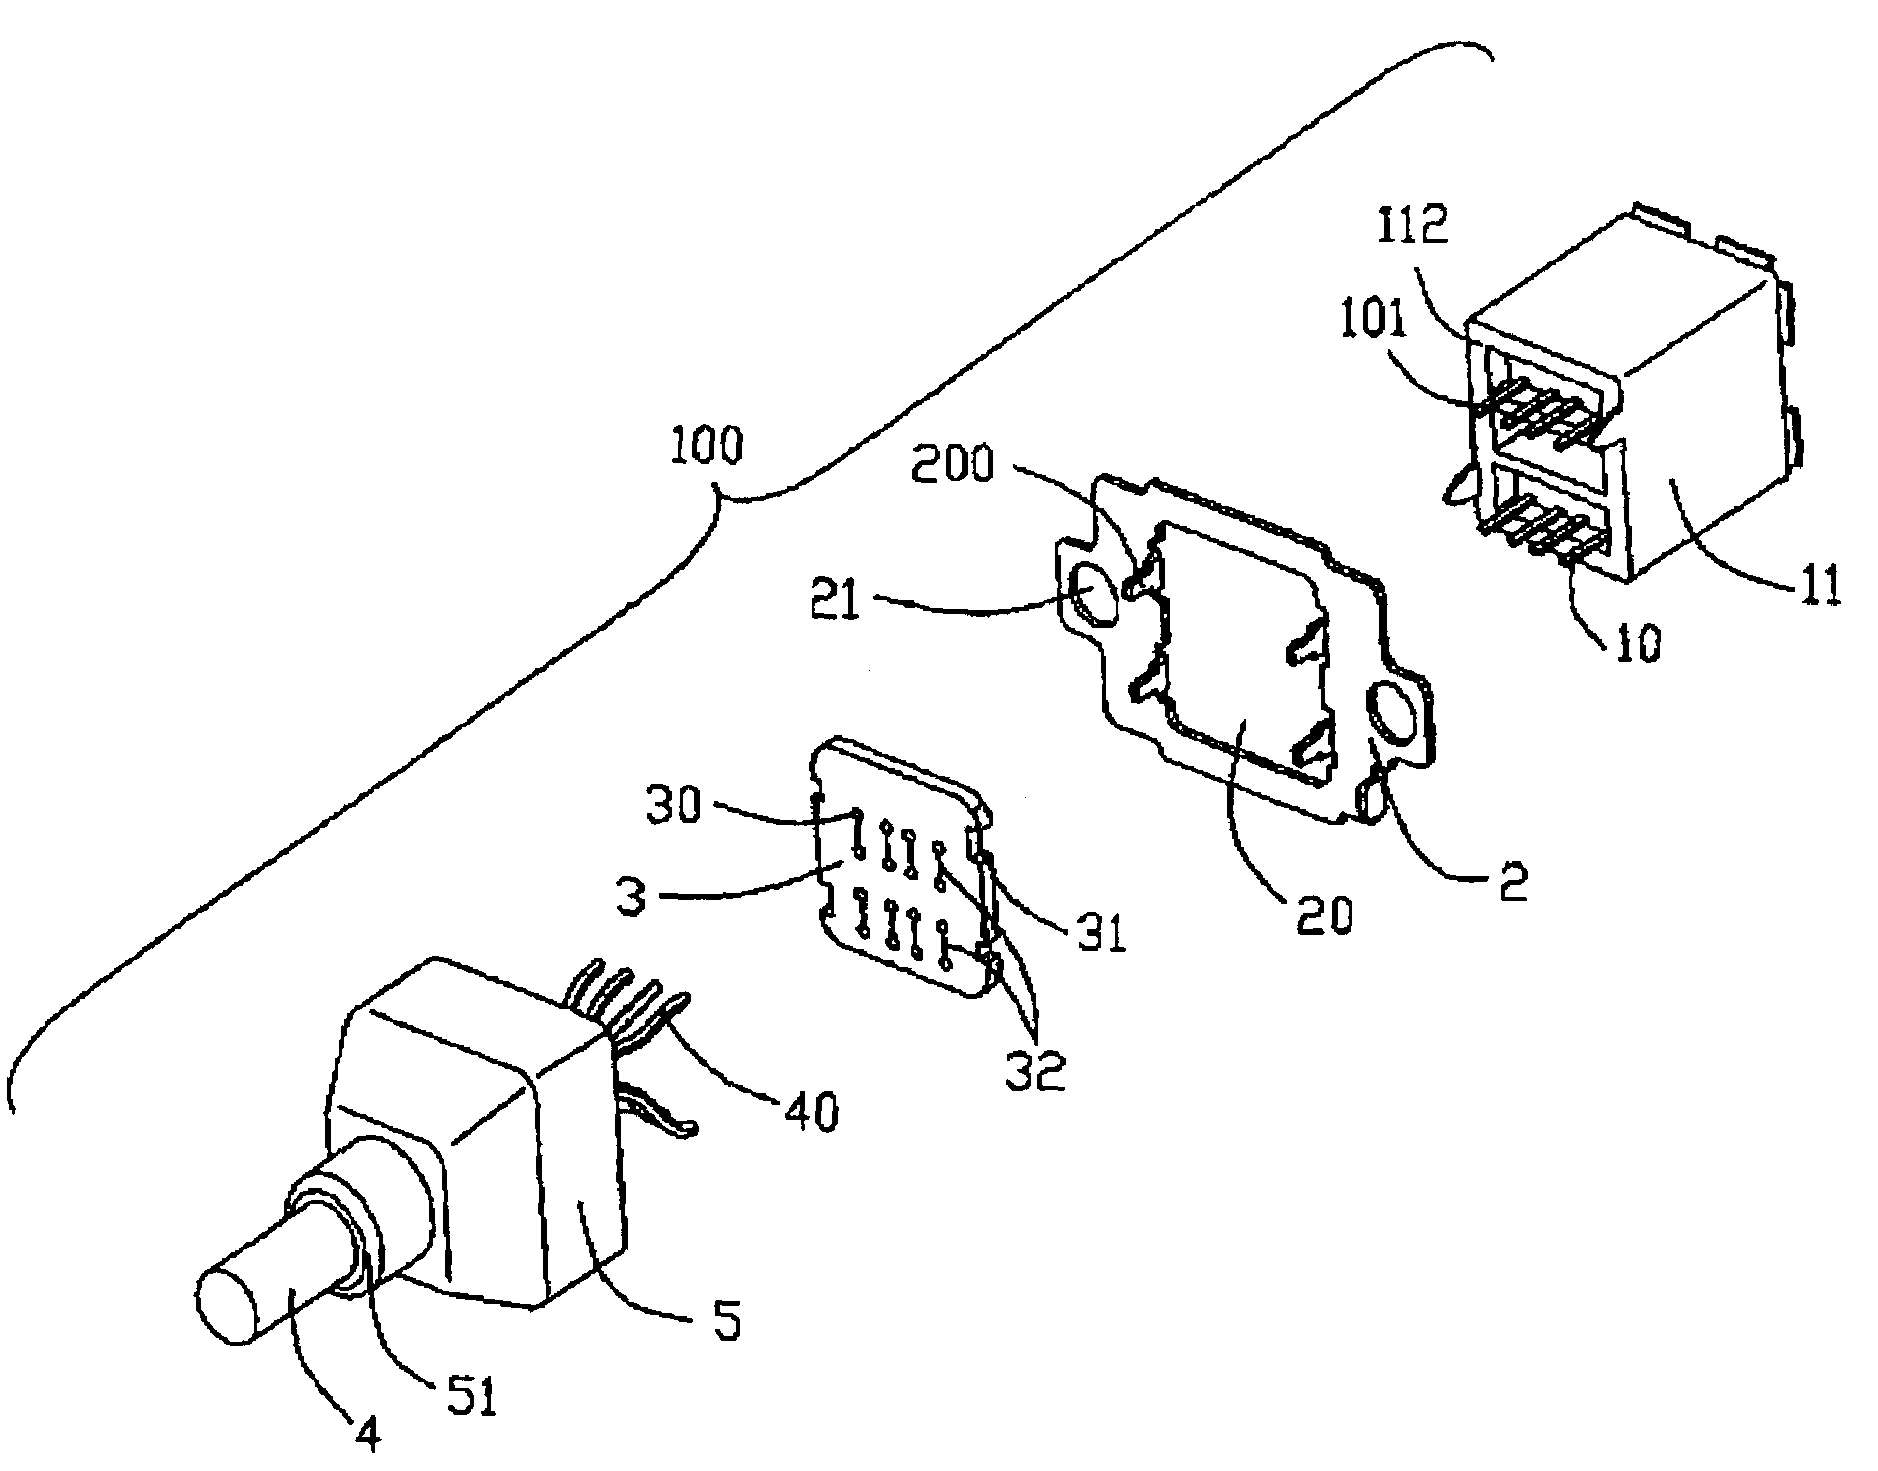 Cable connector assembly with internal printed circuit board